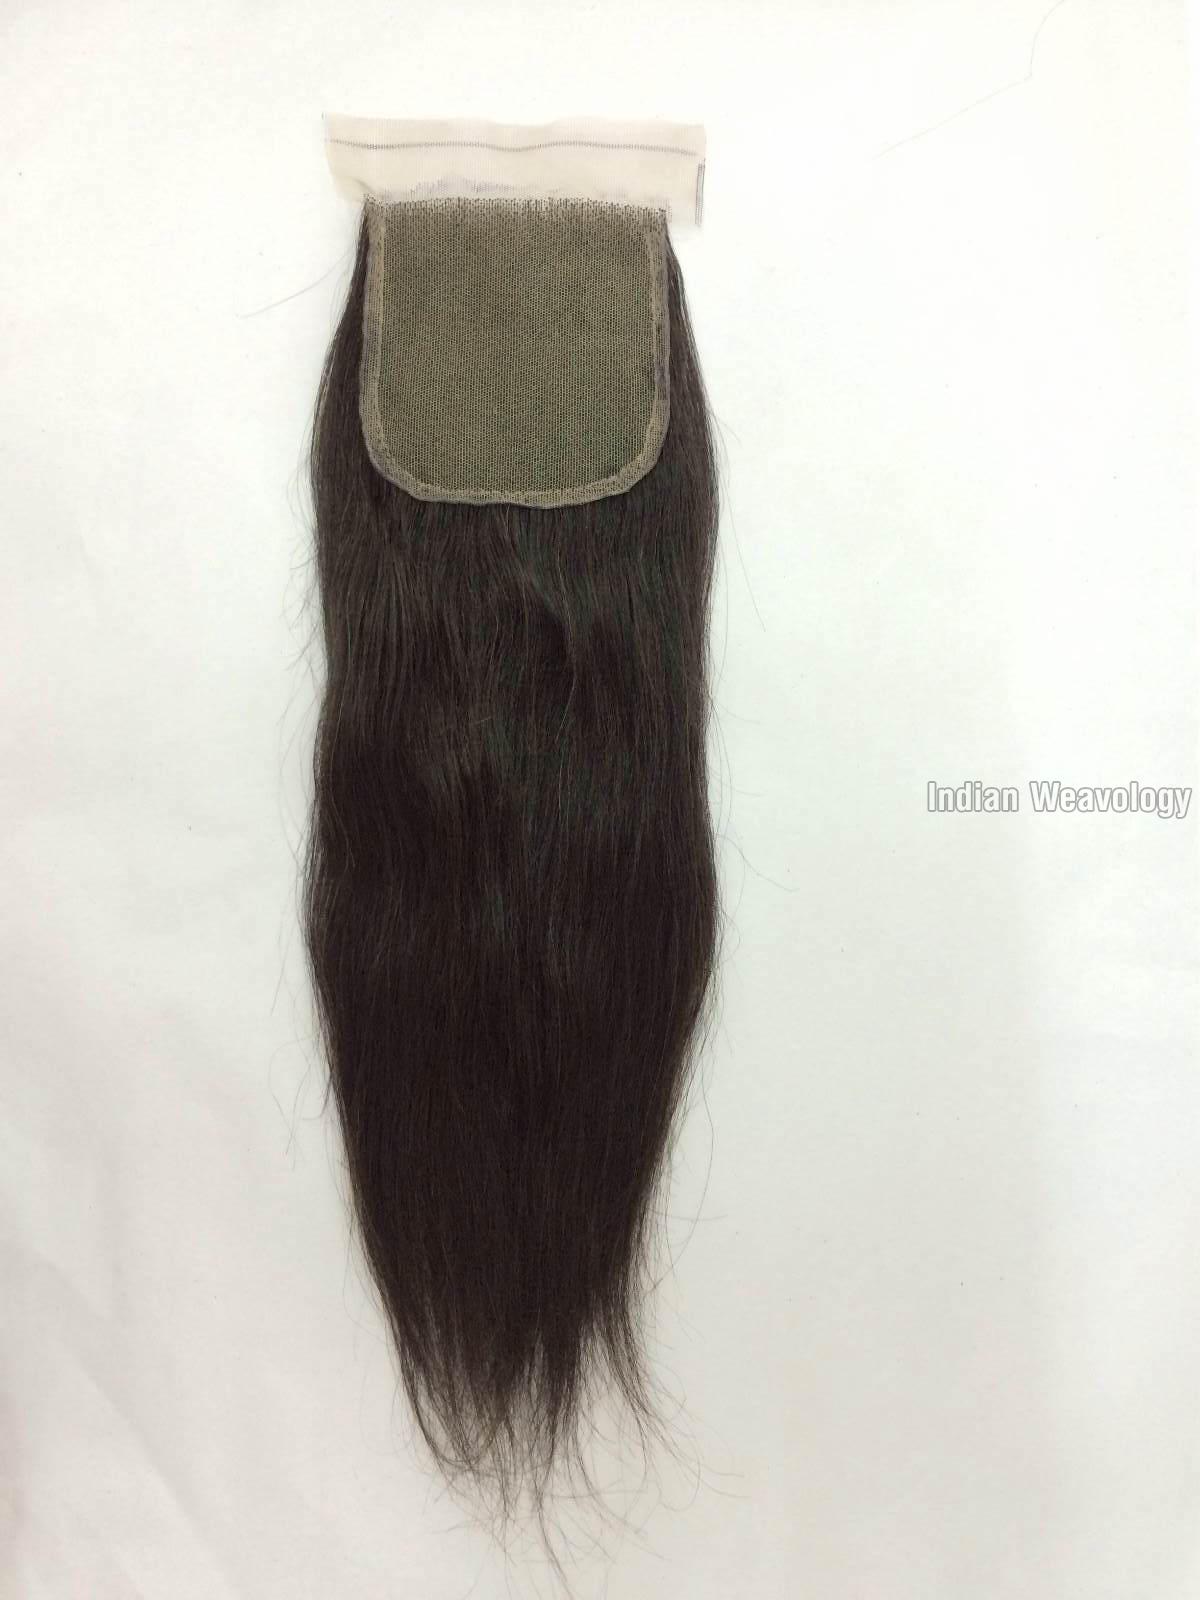 Lace Closure Hair Wig, for Parlour, Personal